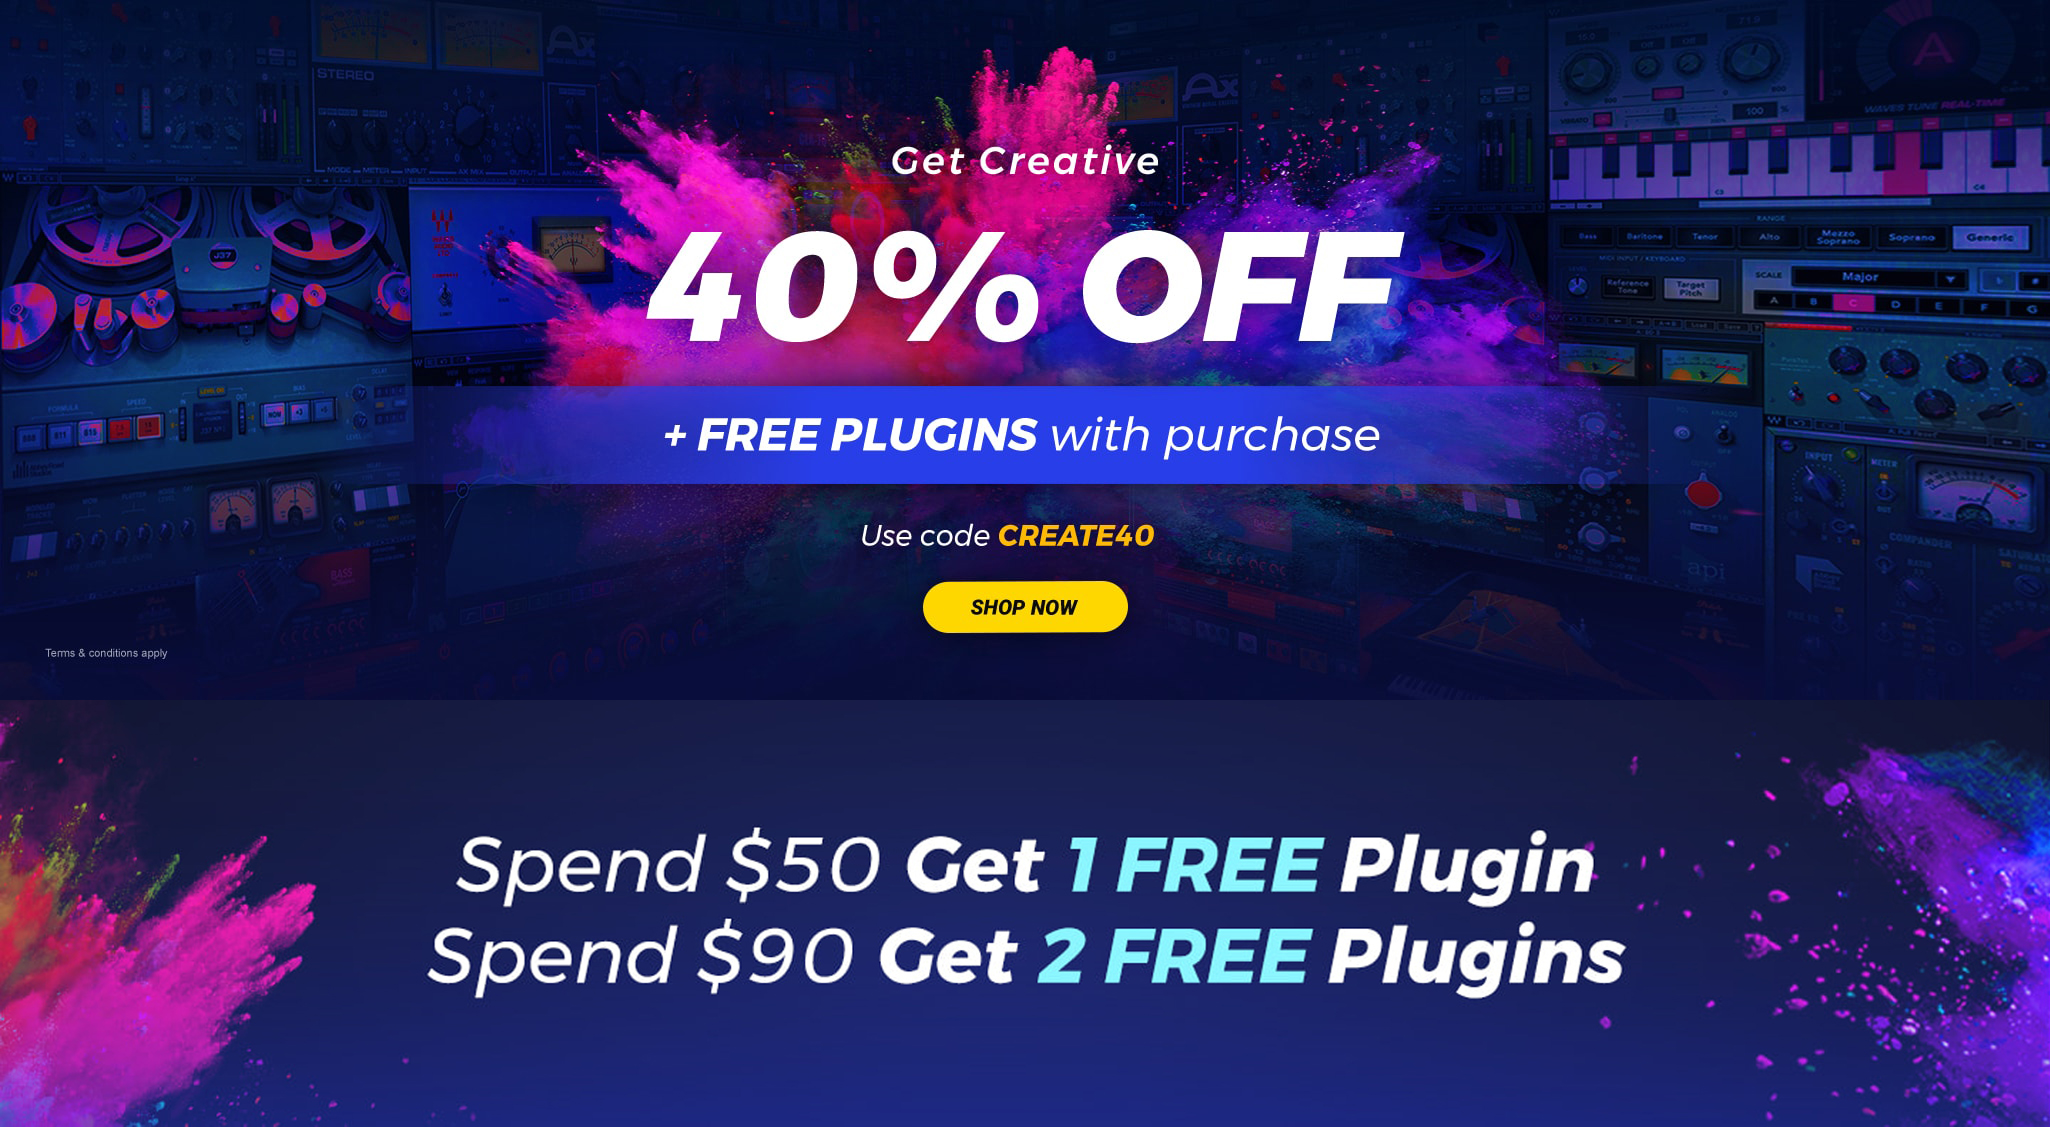 Waves ‘Get Creative’ sale offers 40% off everything and free plugins with orders